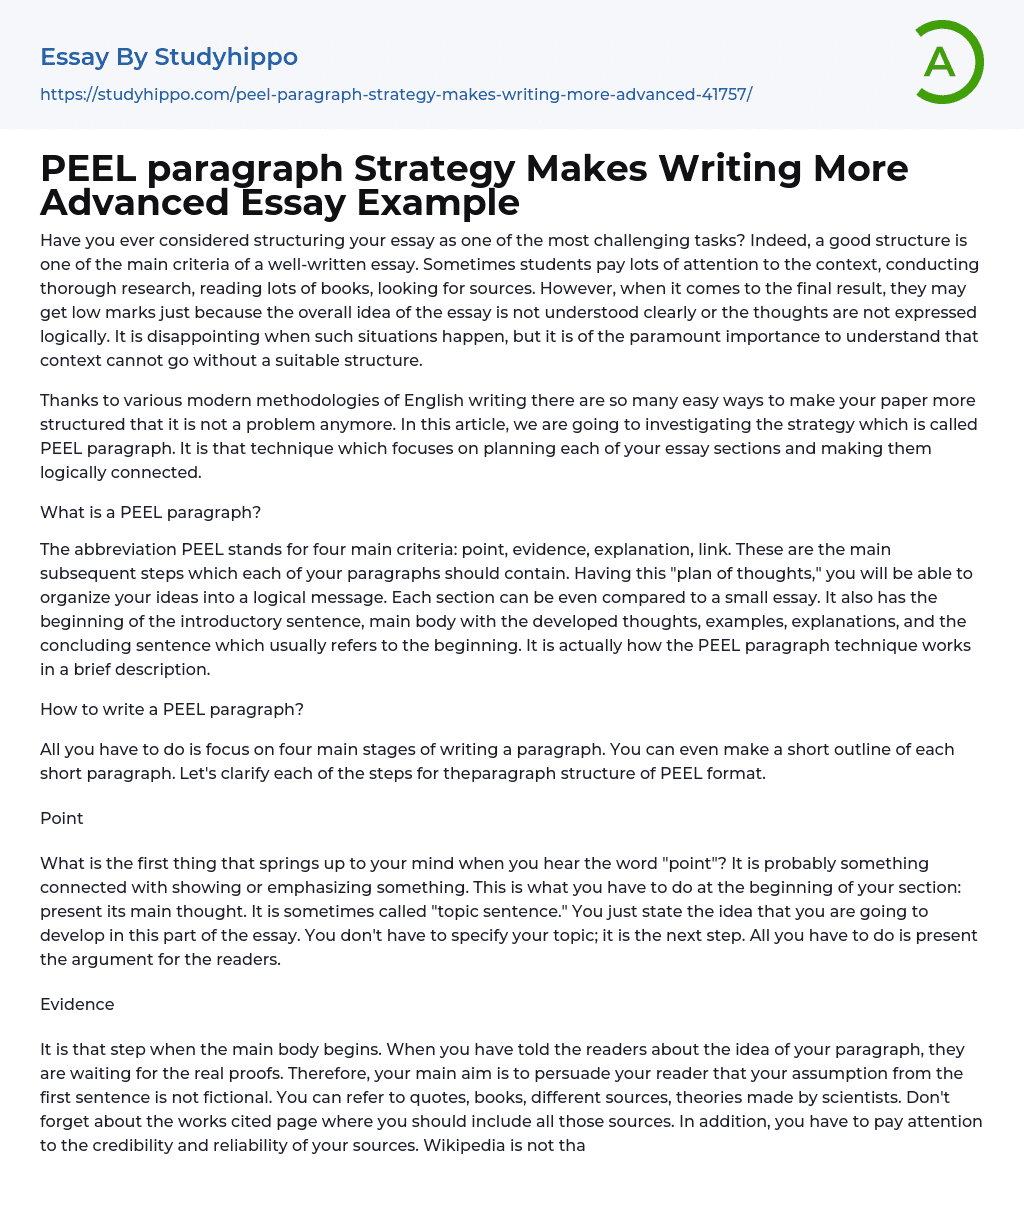 PEEL paragraph Strategy Makes Writing More Advanced Essay Example